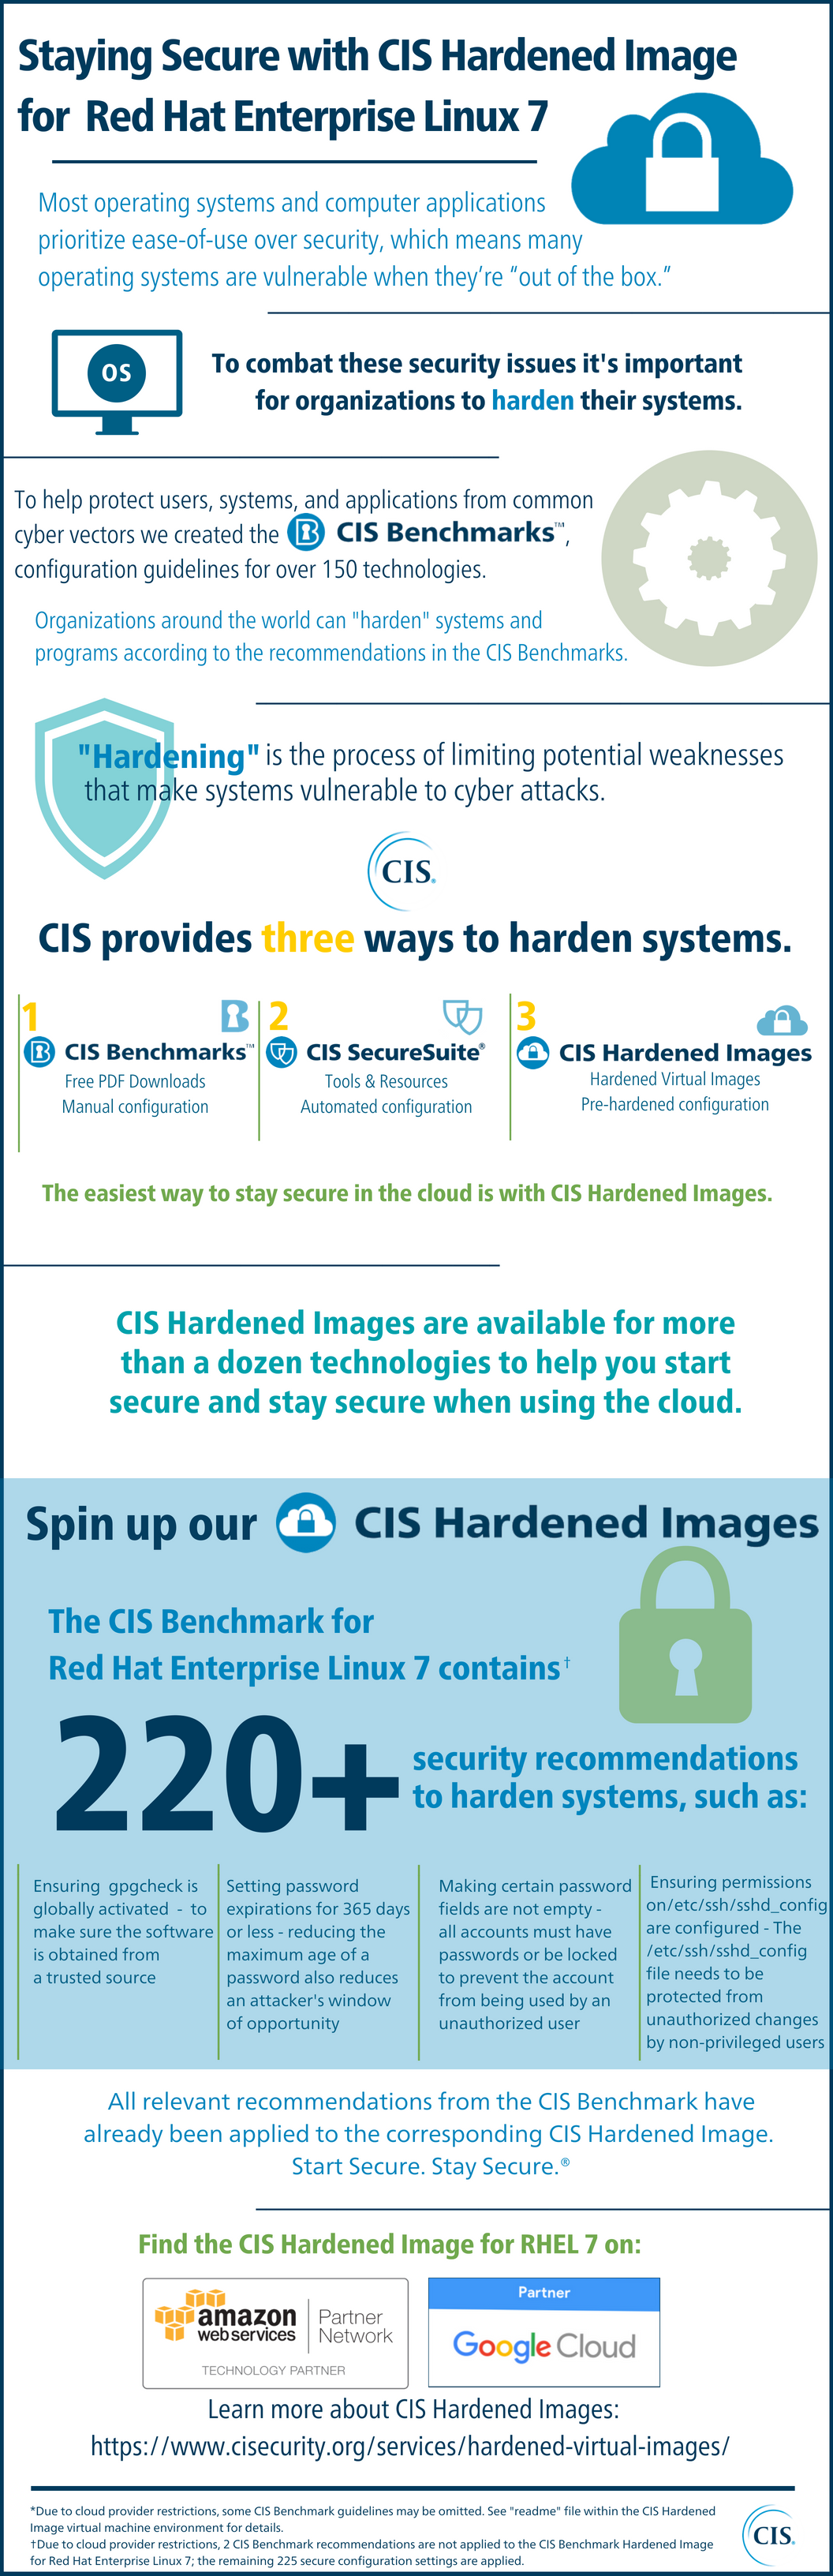 Staying Secure with CIS Hardened Image for Red Hat Enterprise Linux 7